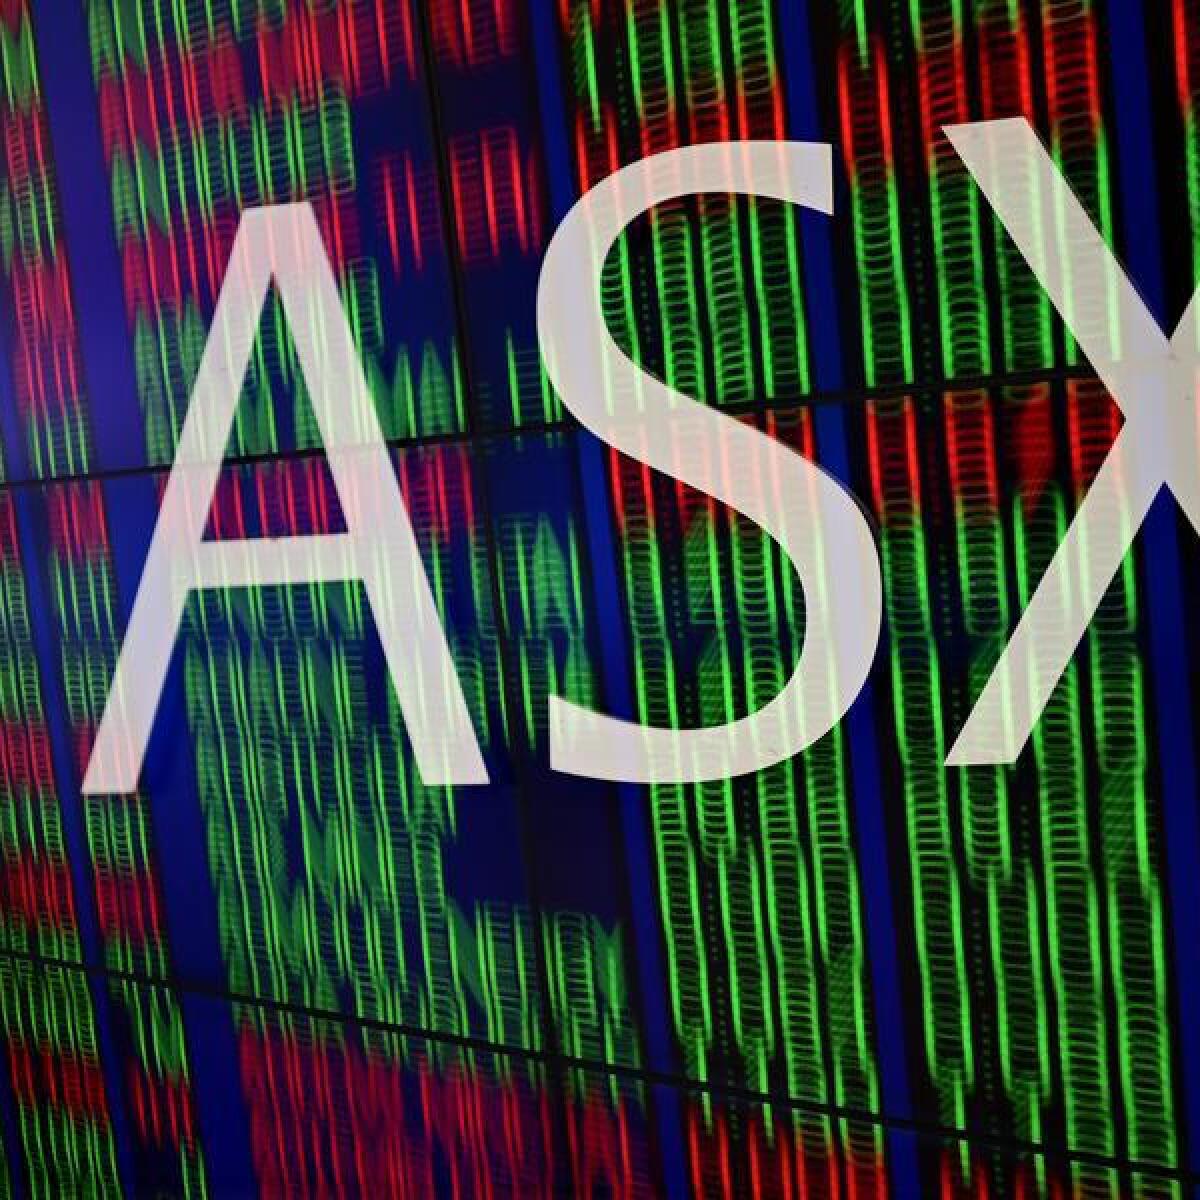 An ASX sign and indicator board (file image)